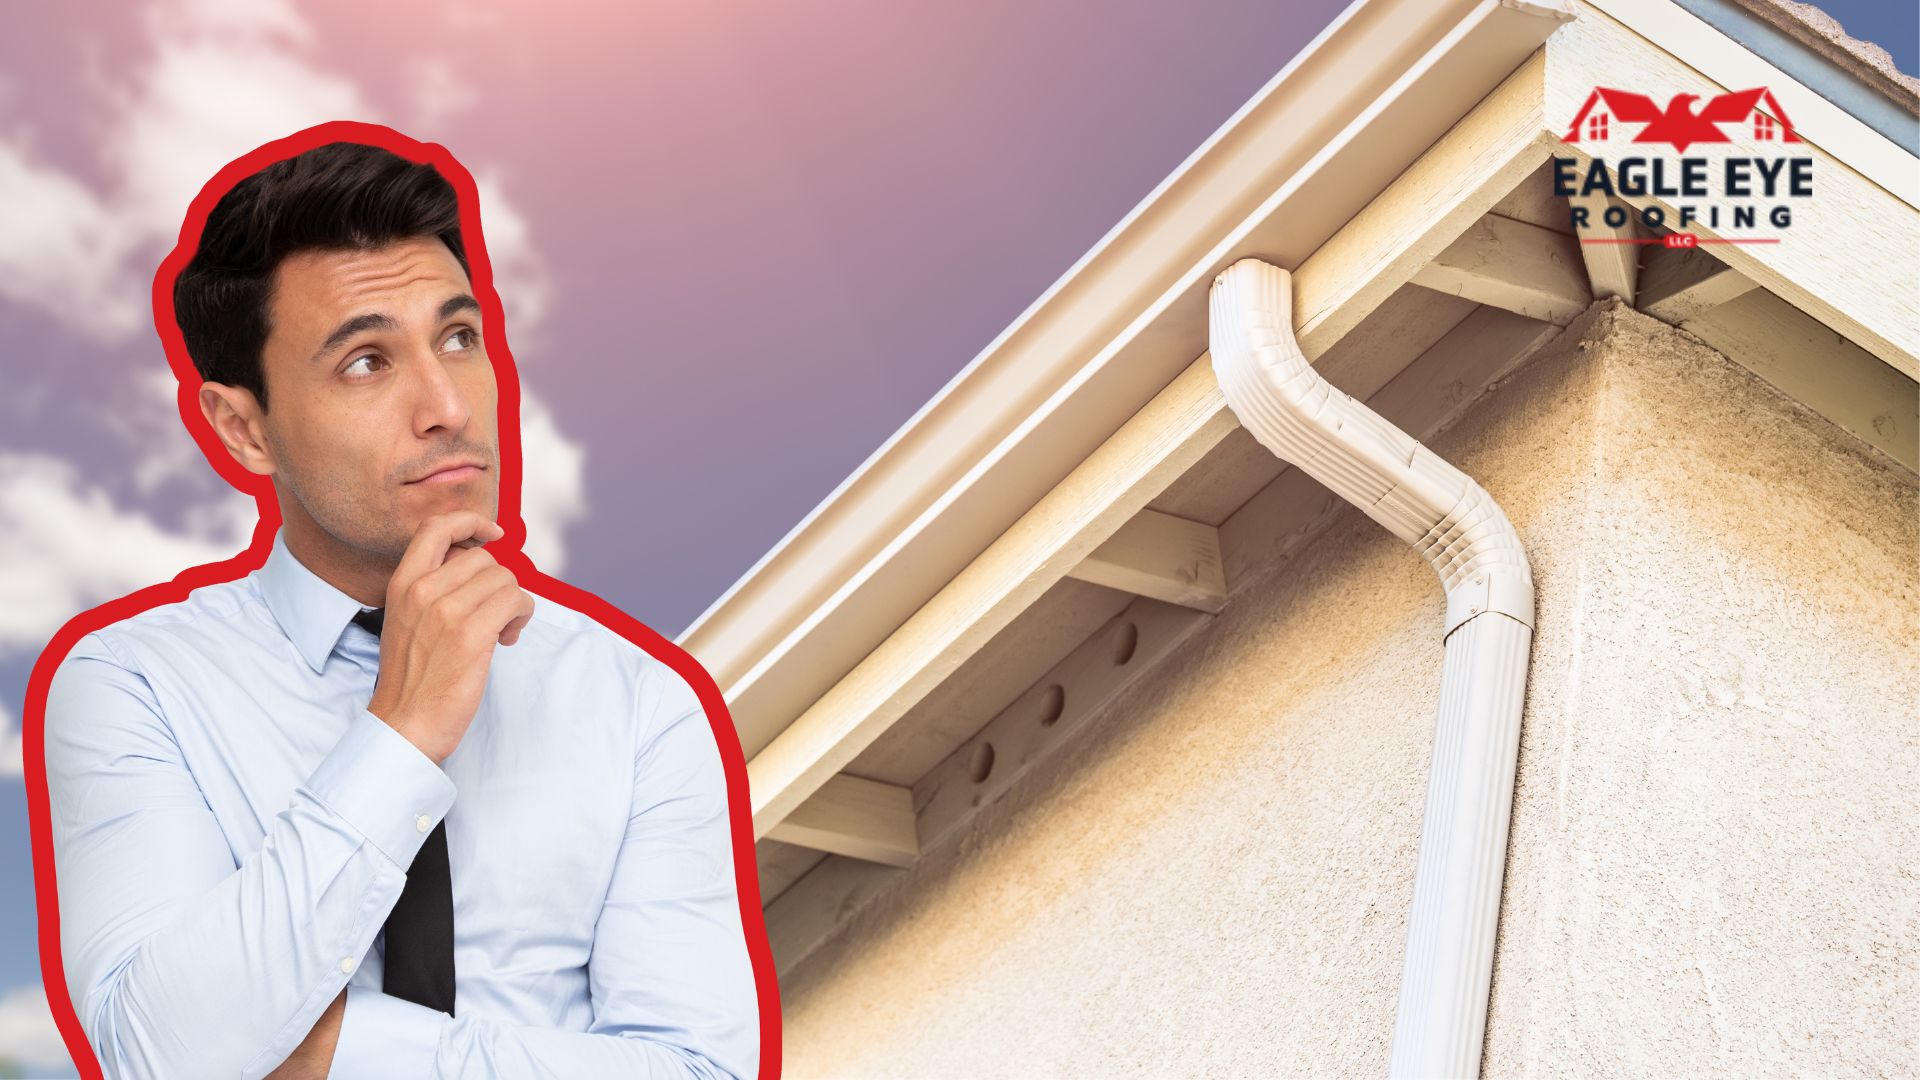 What Do I Need to Install Gutters in Texas